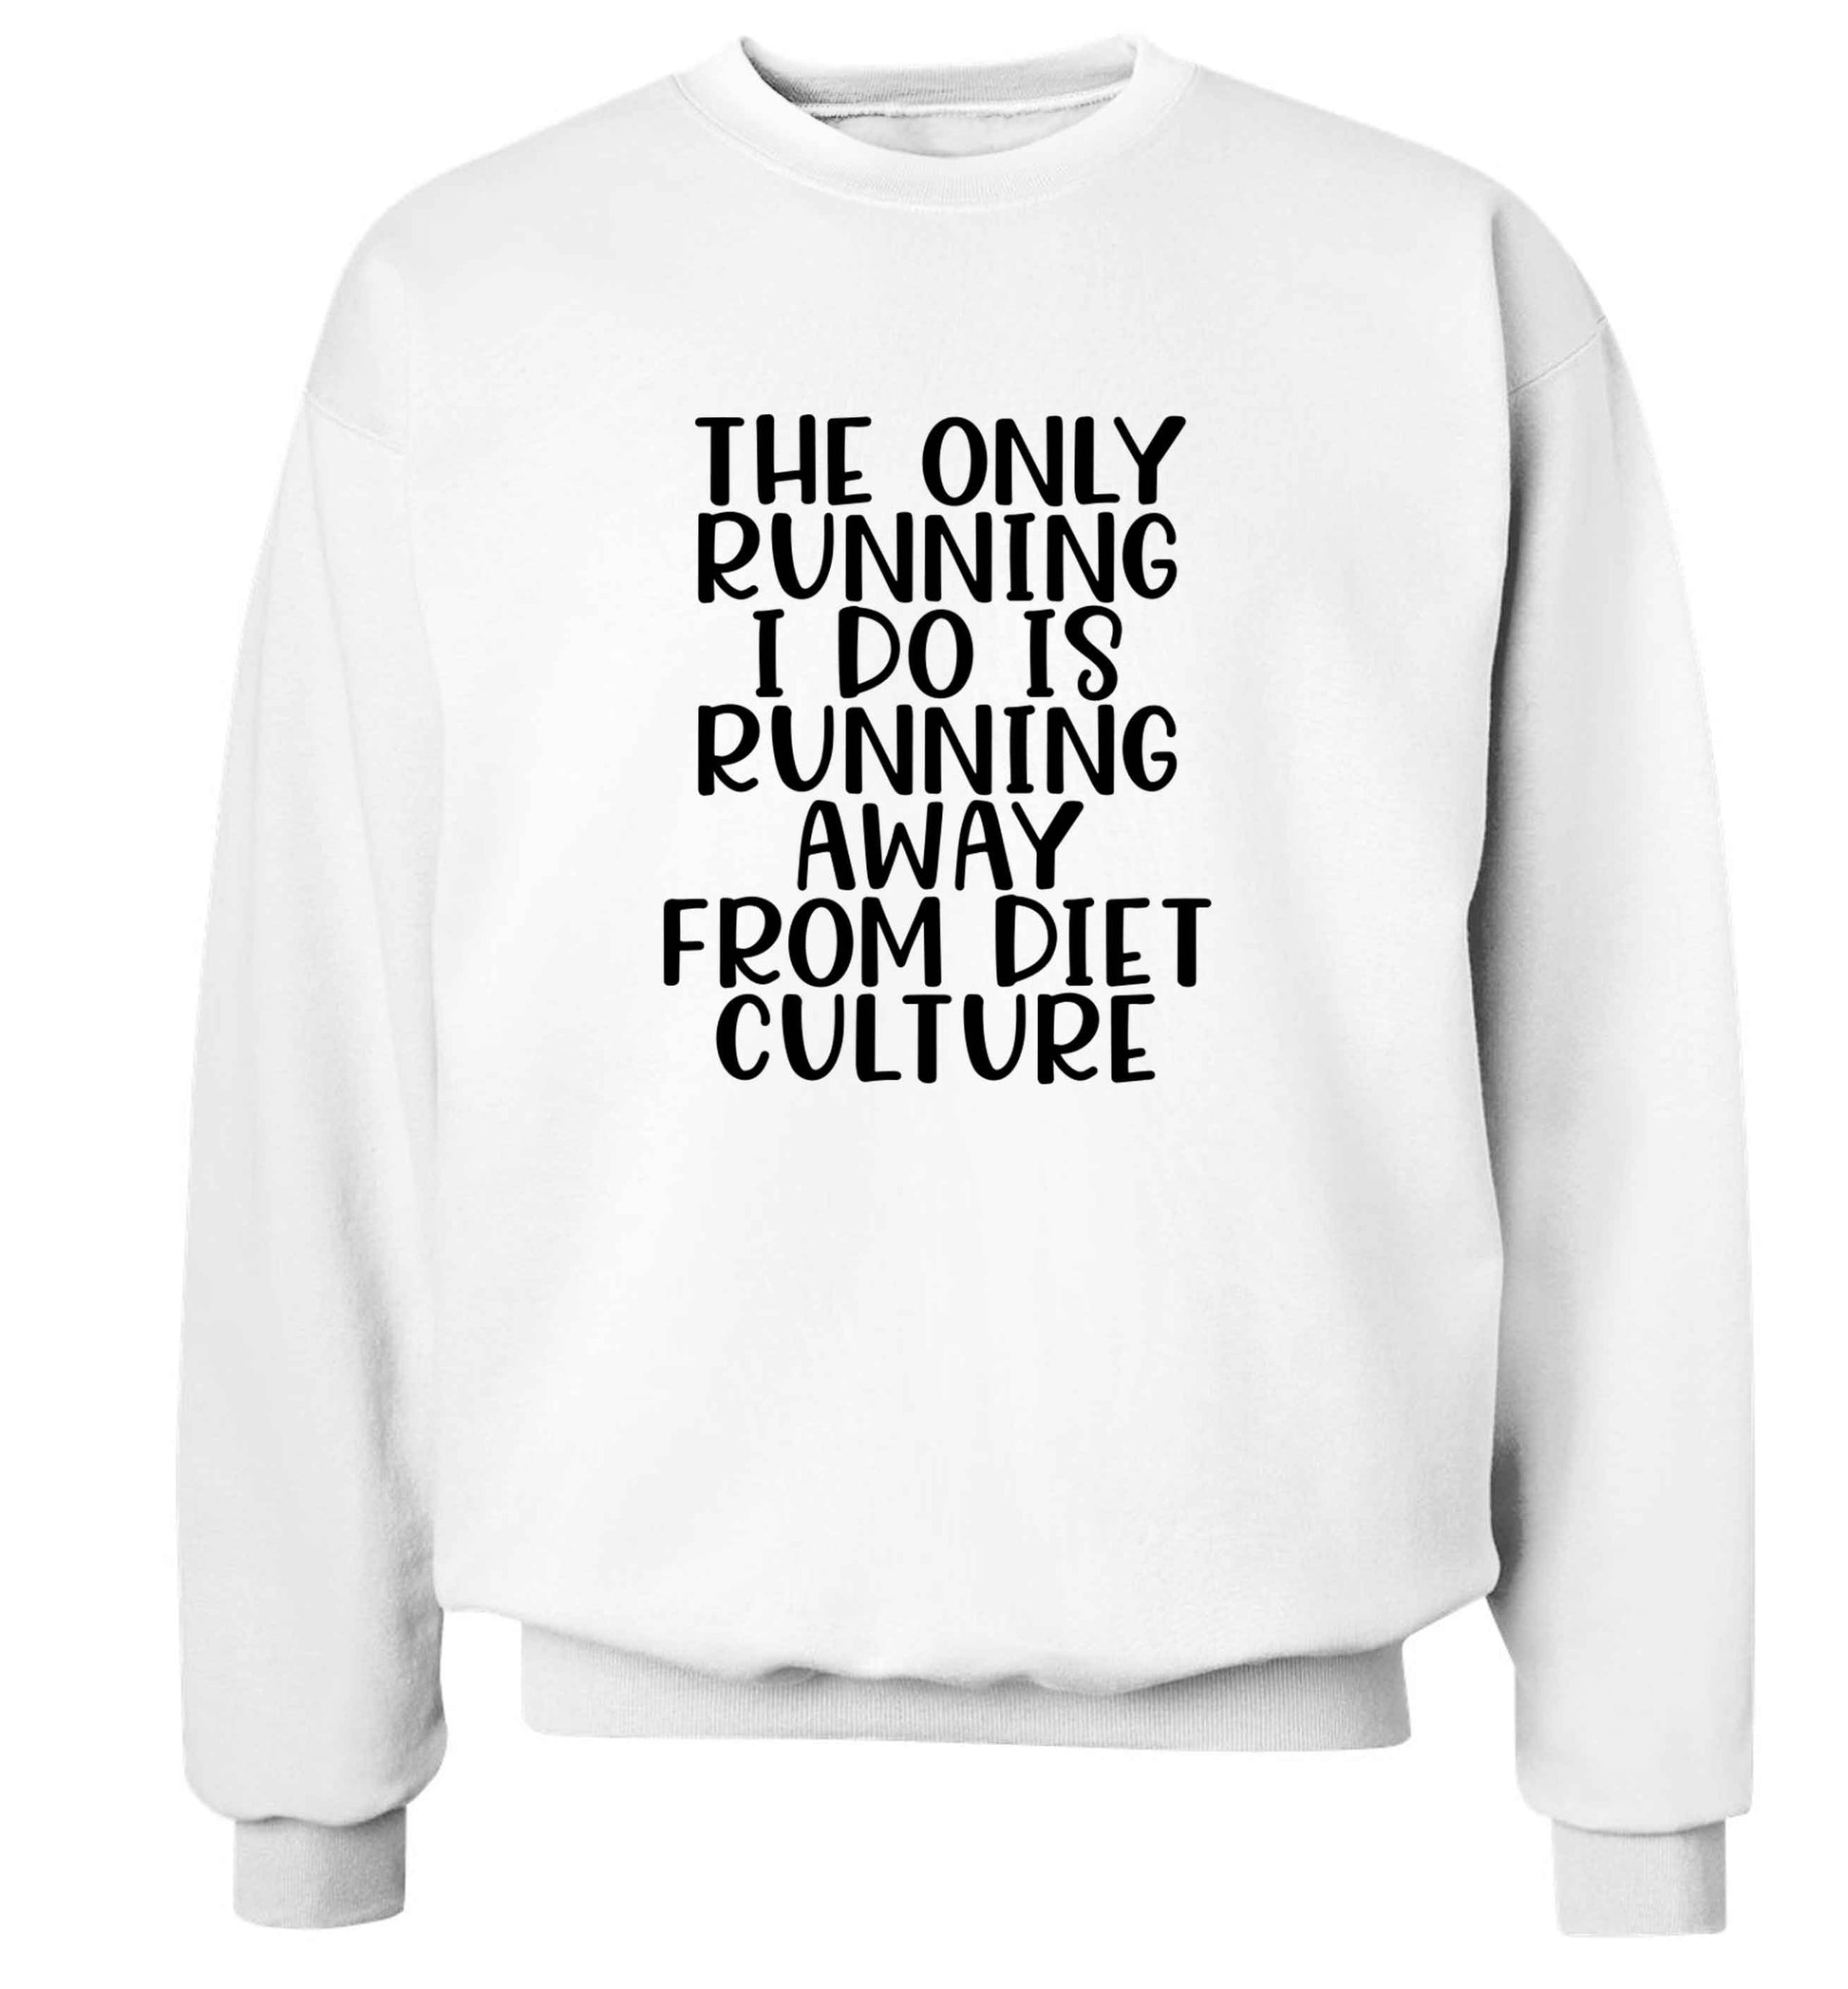 The only running I do is running away from diet culture adult's unisex white sweater 2XL